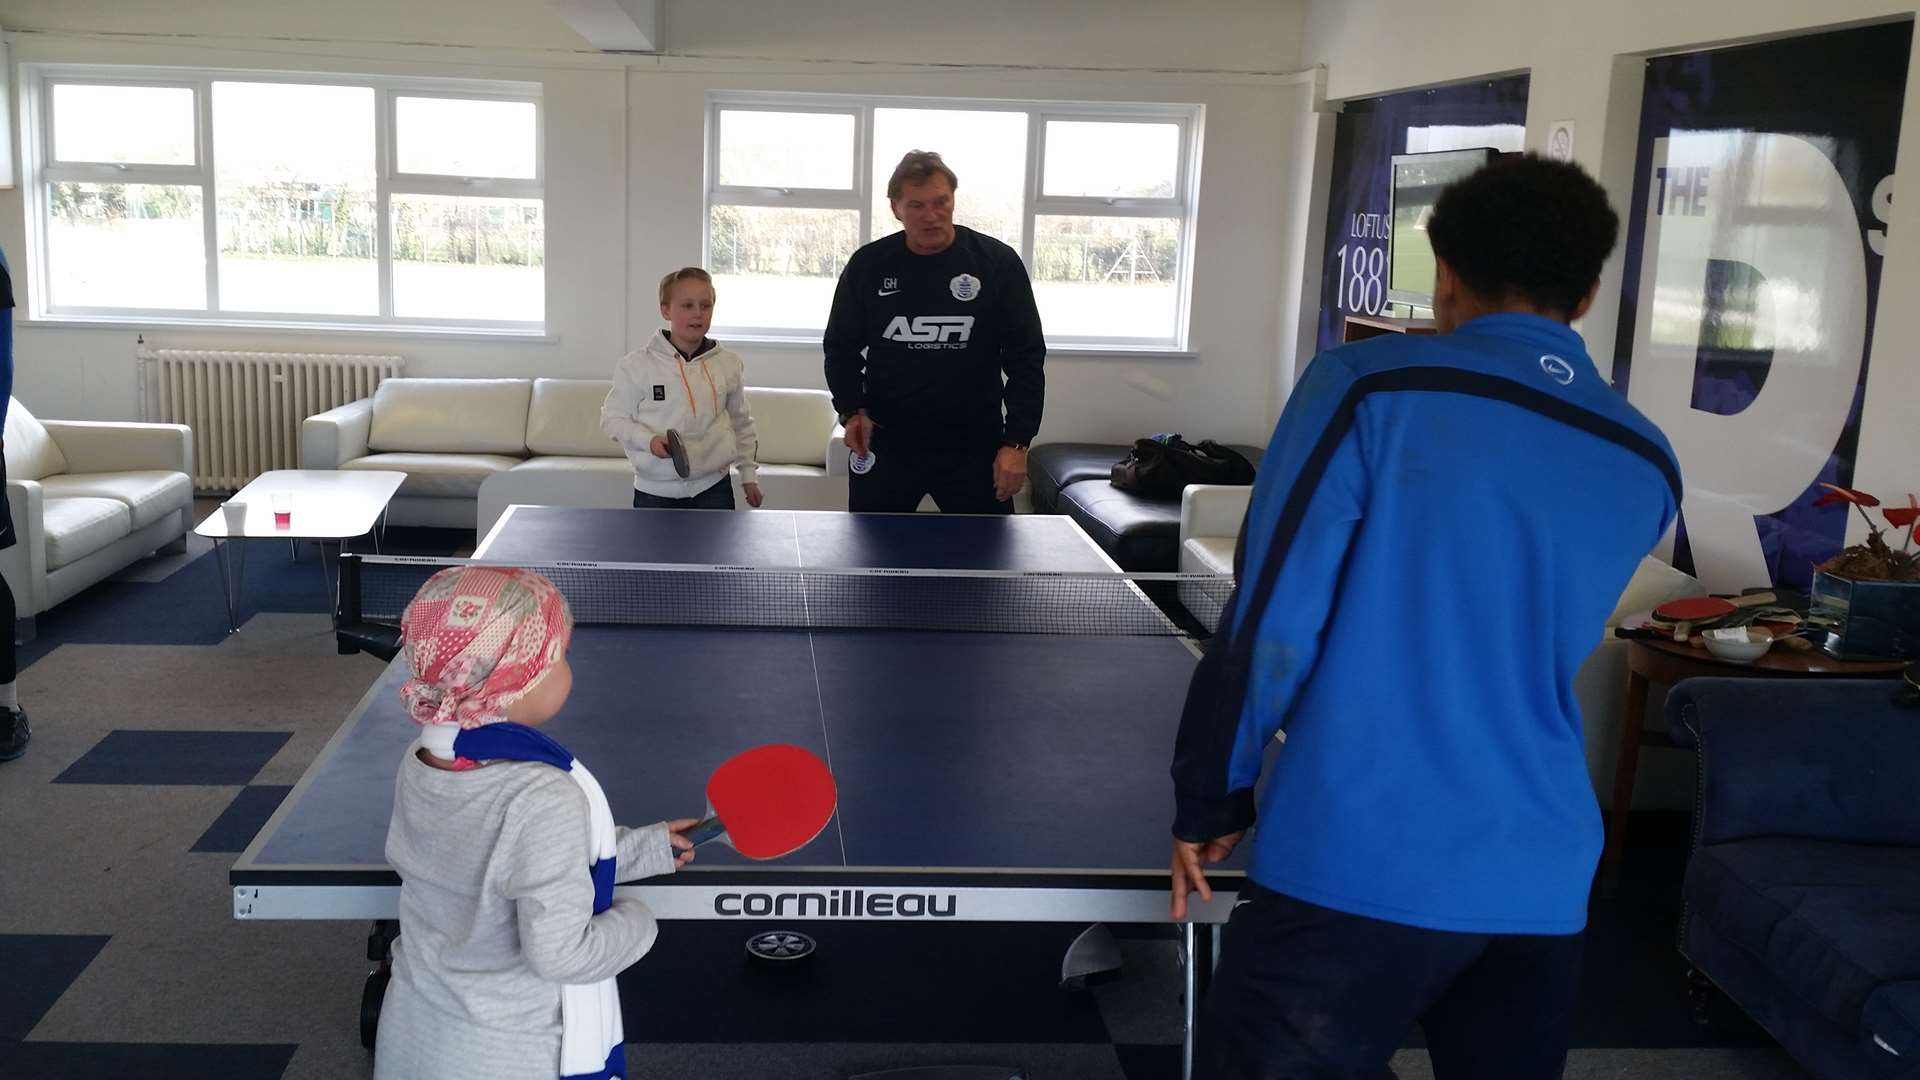 Stacey played table tennis with QPR coach and former England legend Glenn Hoddle